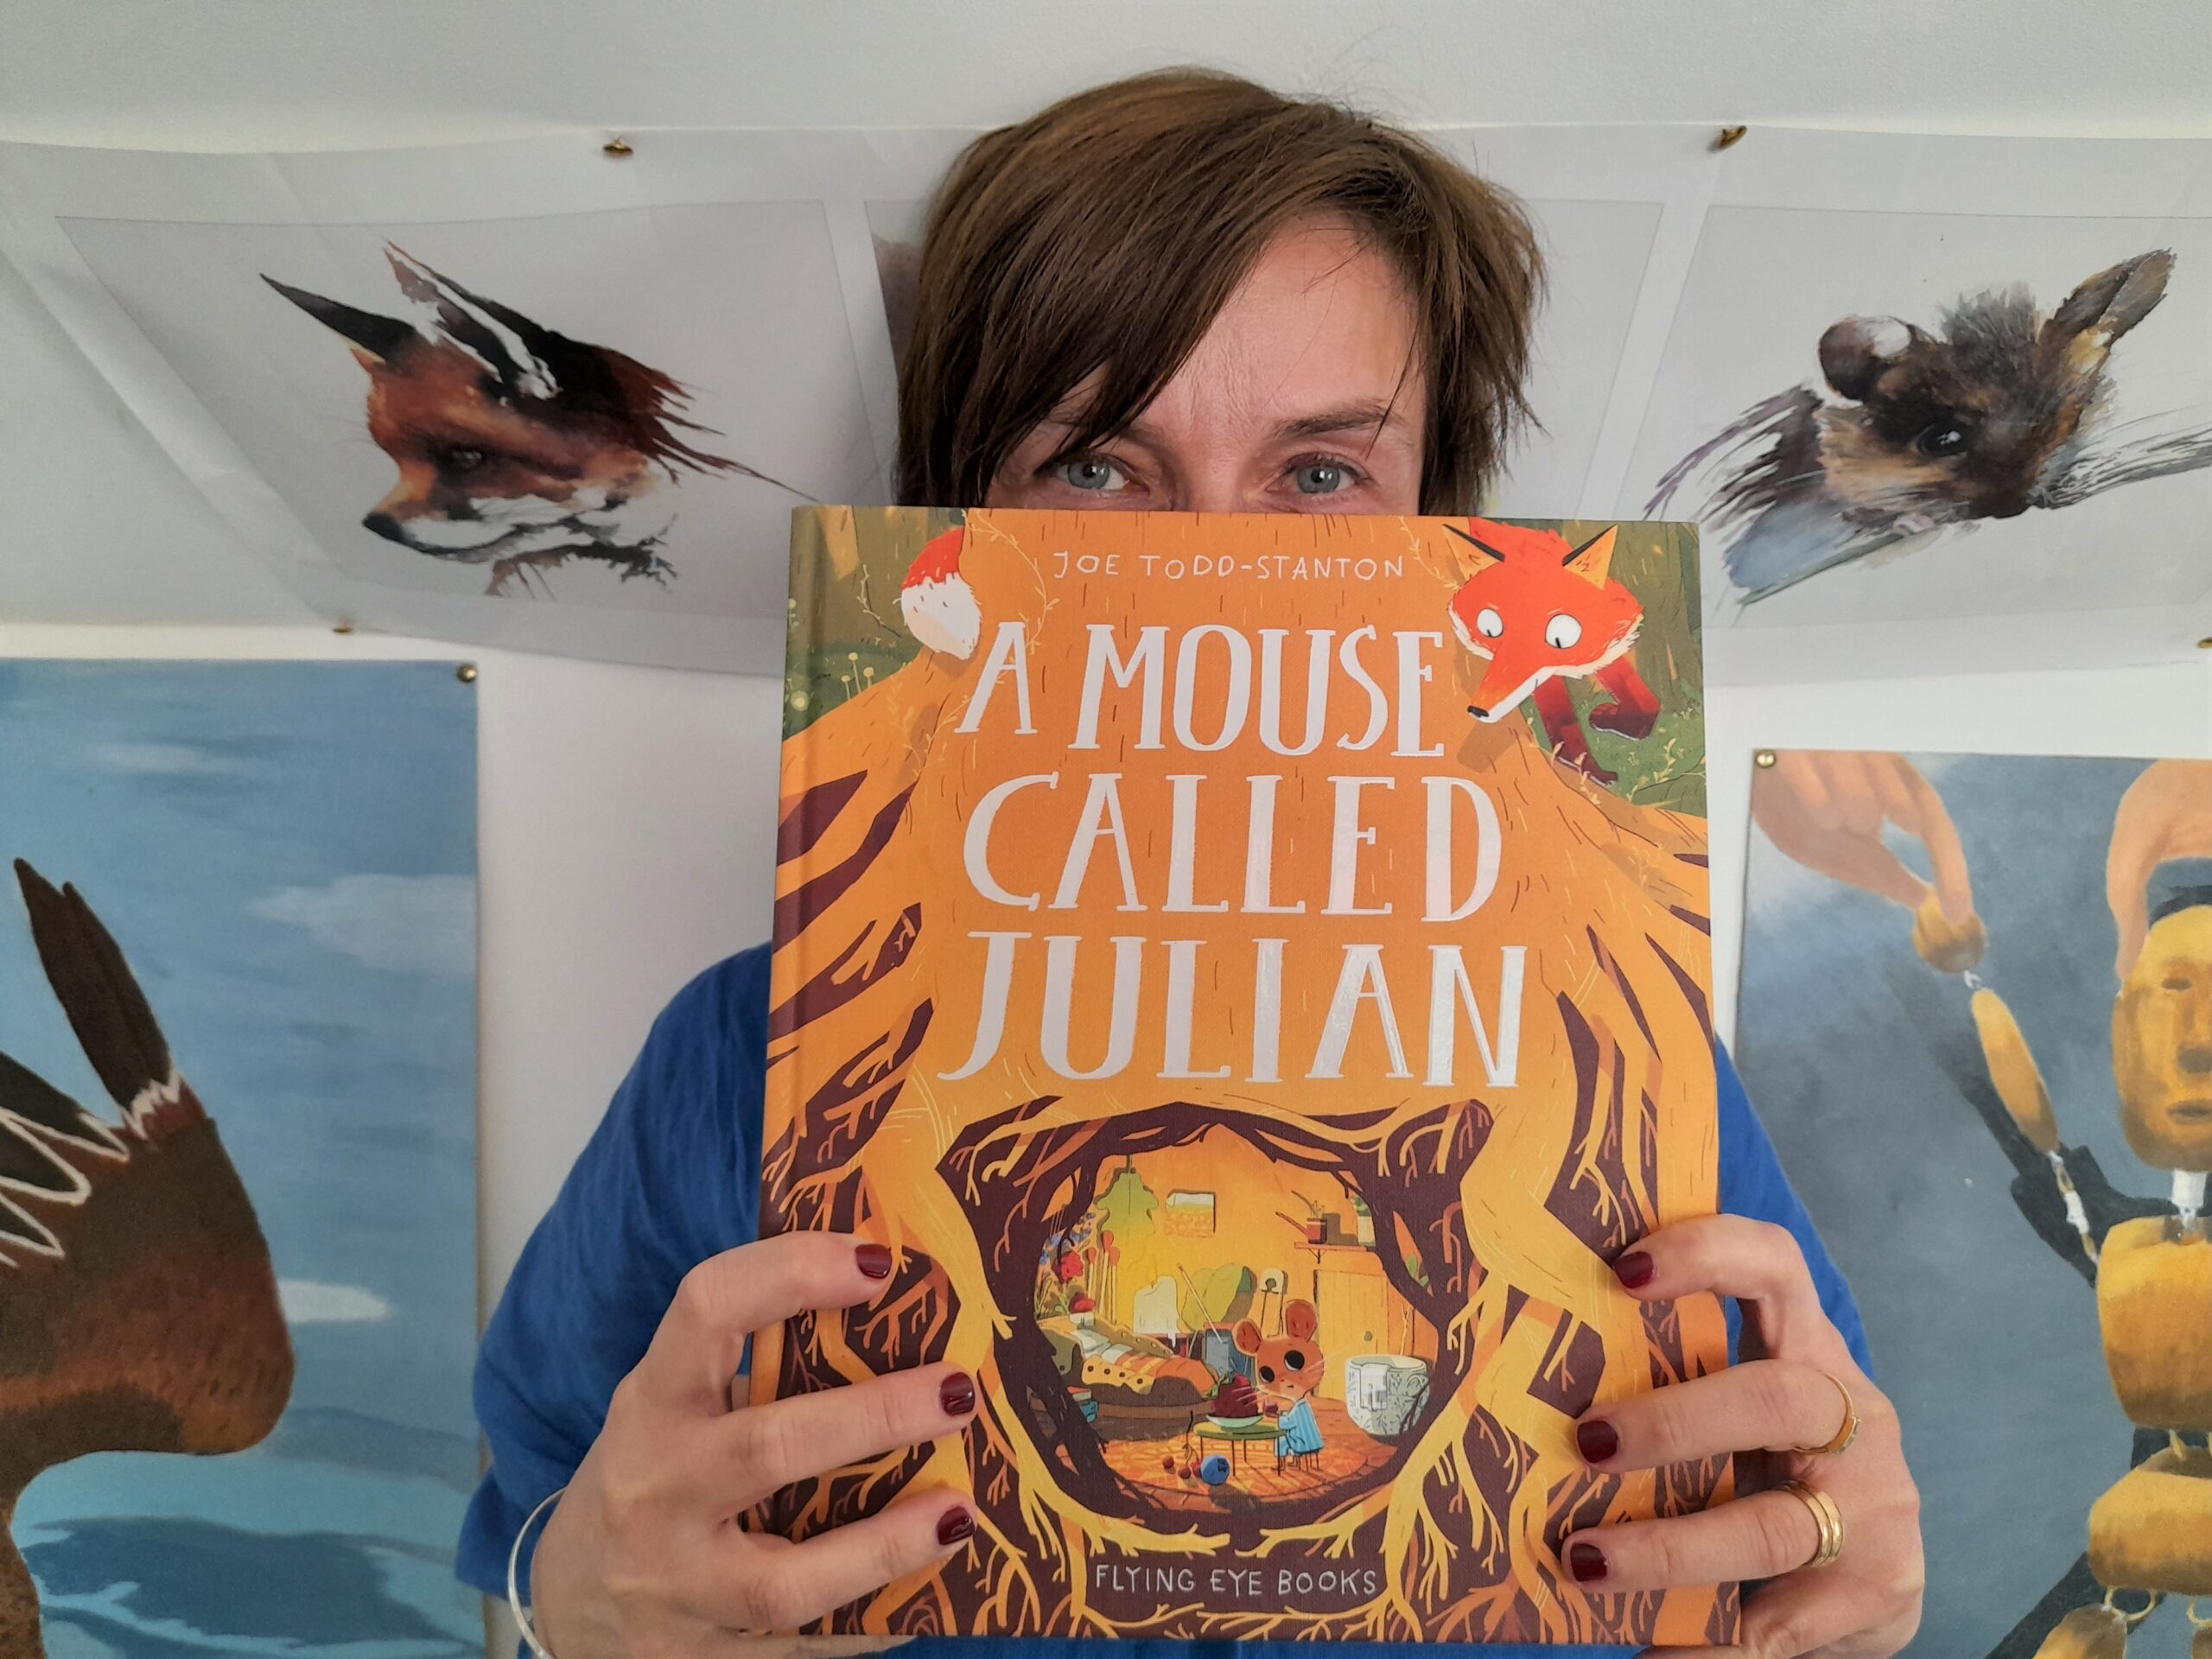 Beata holding the book A Mouse Called Julian